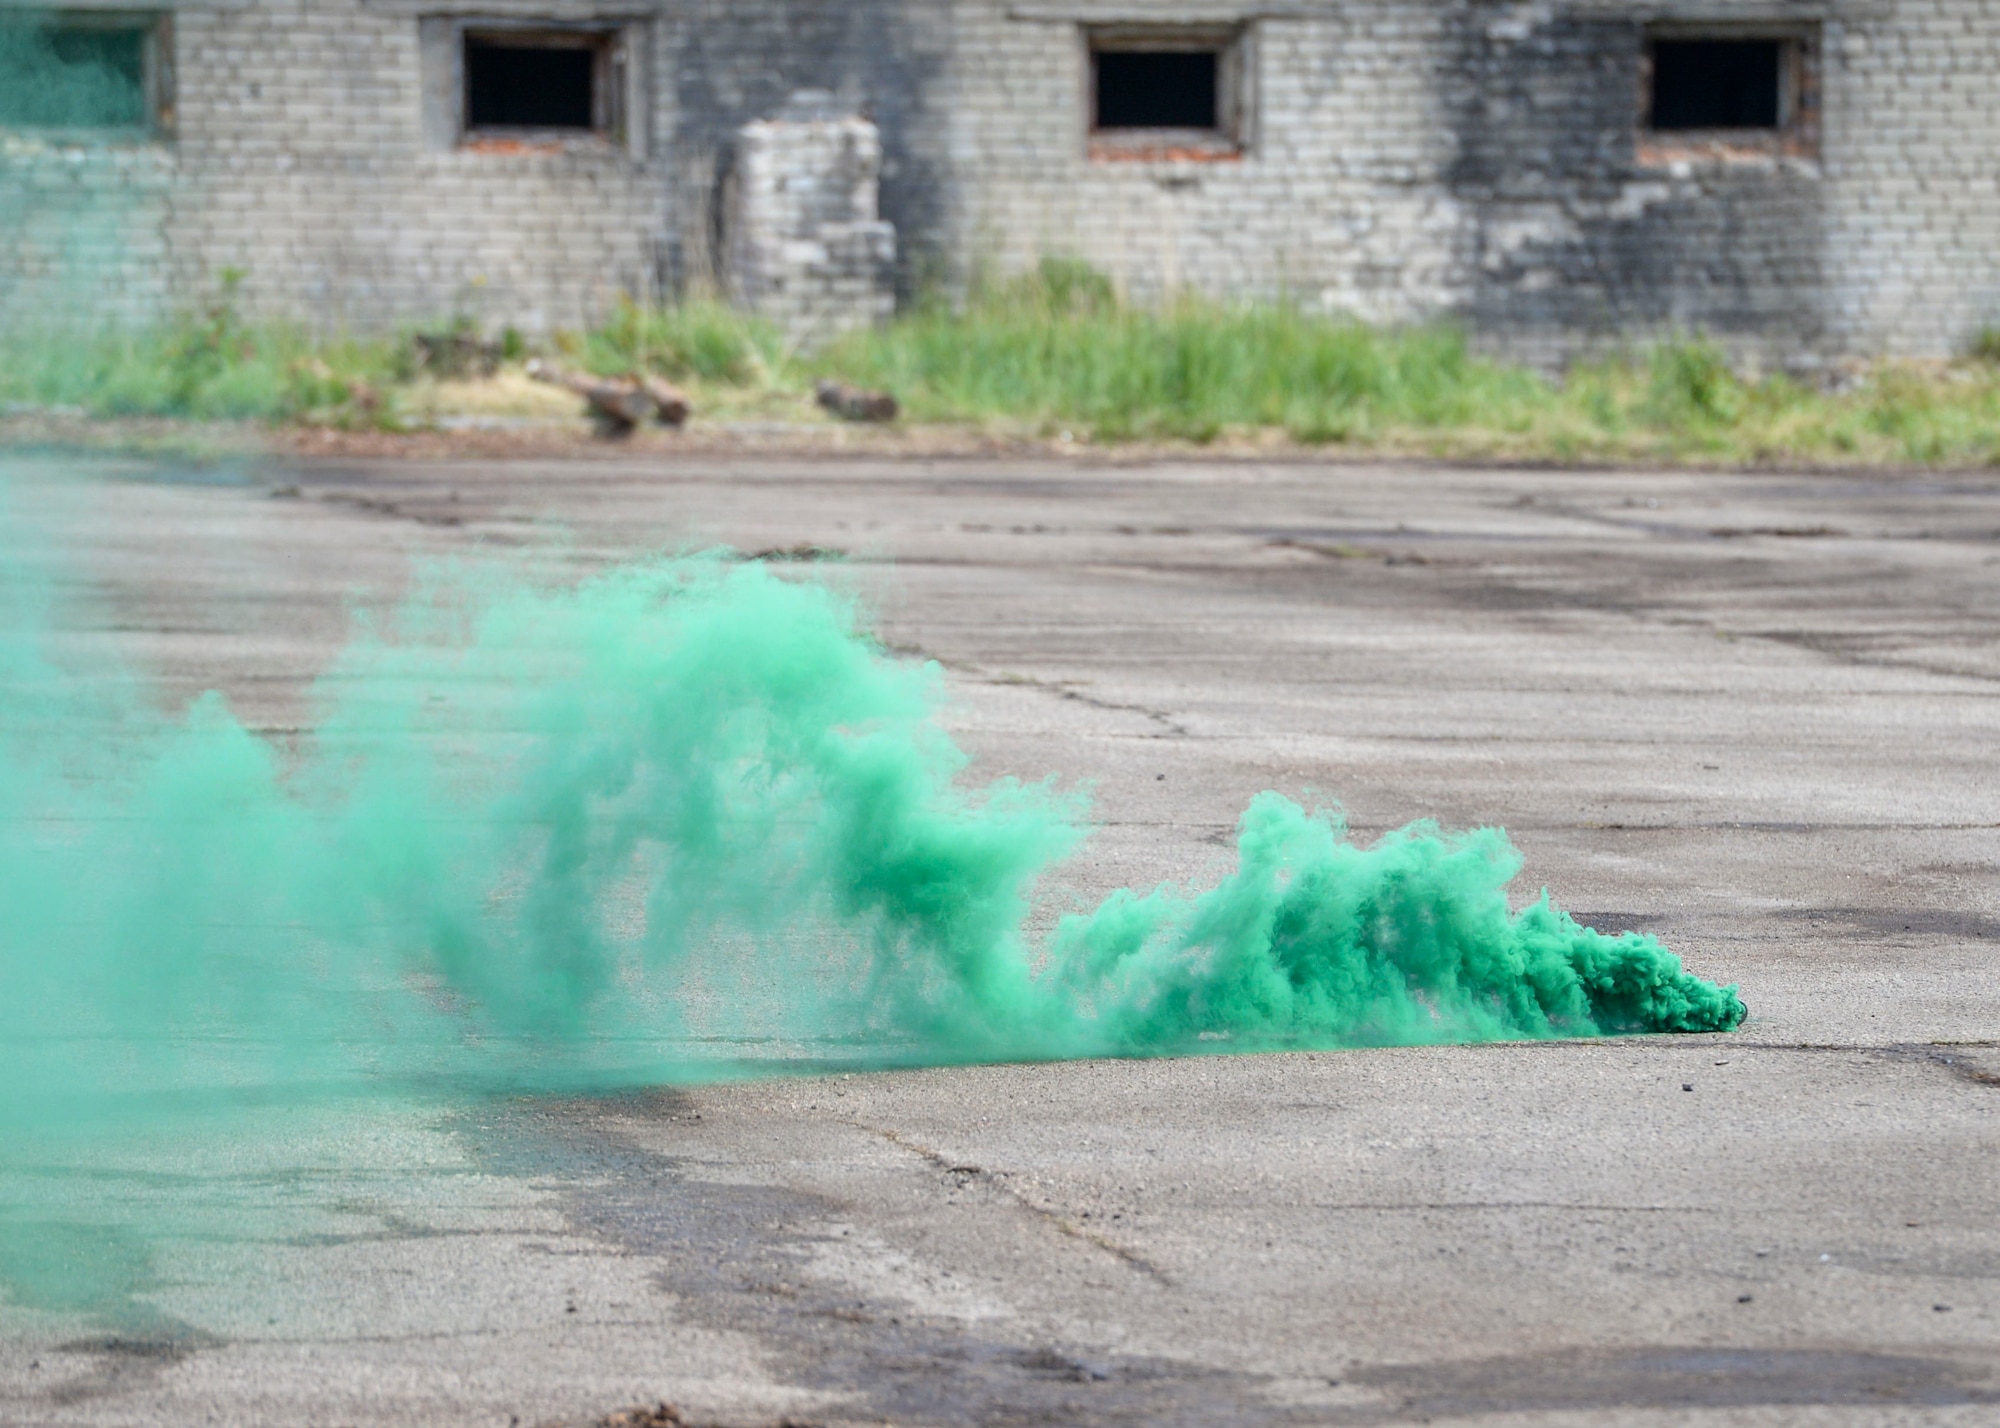 Green smoke marks the landing zone for a Latvian MI-17 Helicopter to land for a simulated medical evacuation during an exercise in Skrunda, Latvia on June 13, 2018. The battle was part of Saber Strike 18 and pieced together communication, tactics, and other facets of military operation into one scenario. (U.S. Air Force photo by Staff Sgt. Jimmie D. Pike)